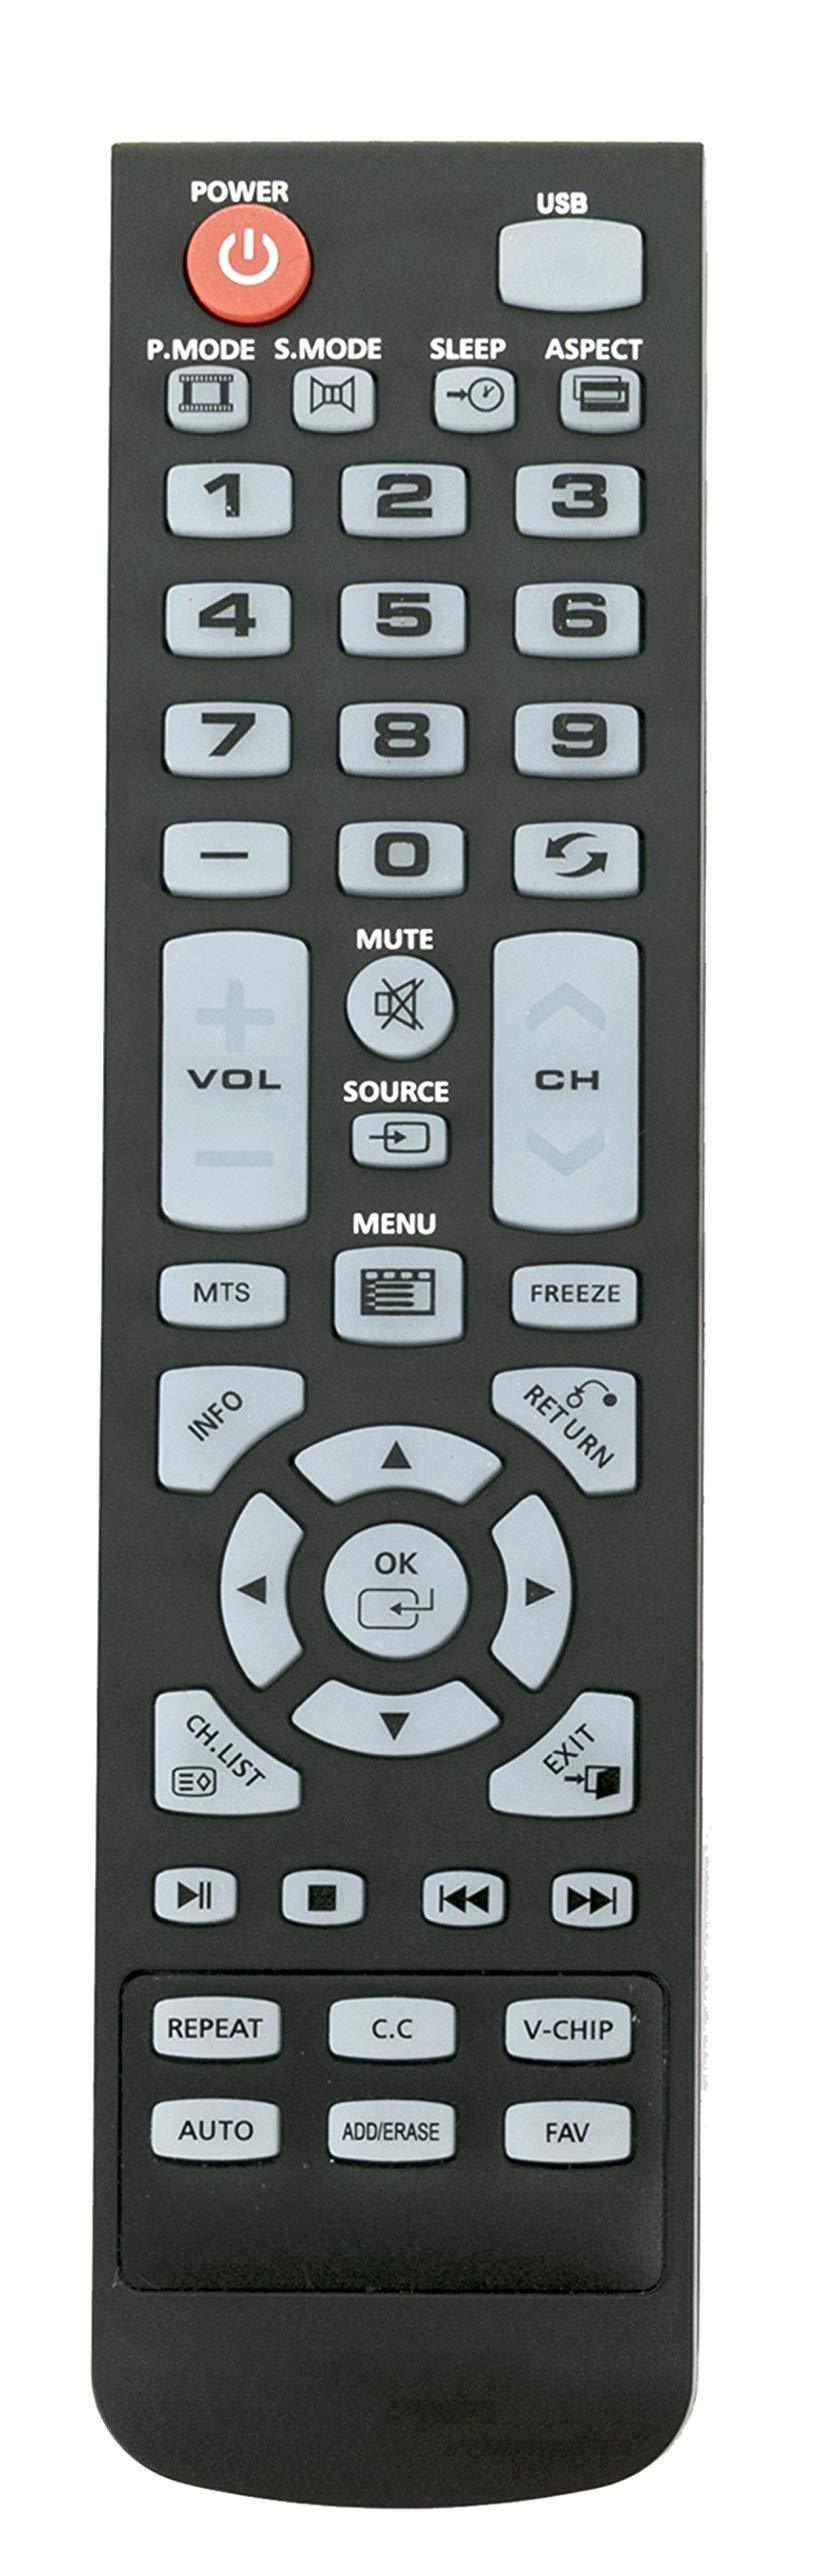 Remote Control XHY353-3 WS-1688-2 Compatible with Element TV ELEFW504A ELEFW247 ELEFW328 ELEFW504A ELEFT426 ELEFT506